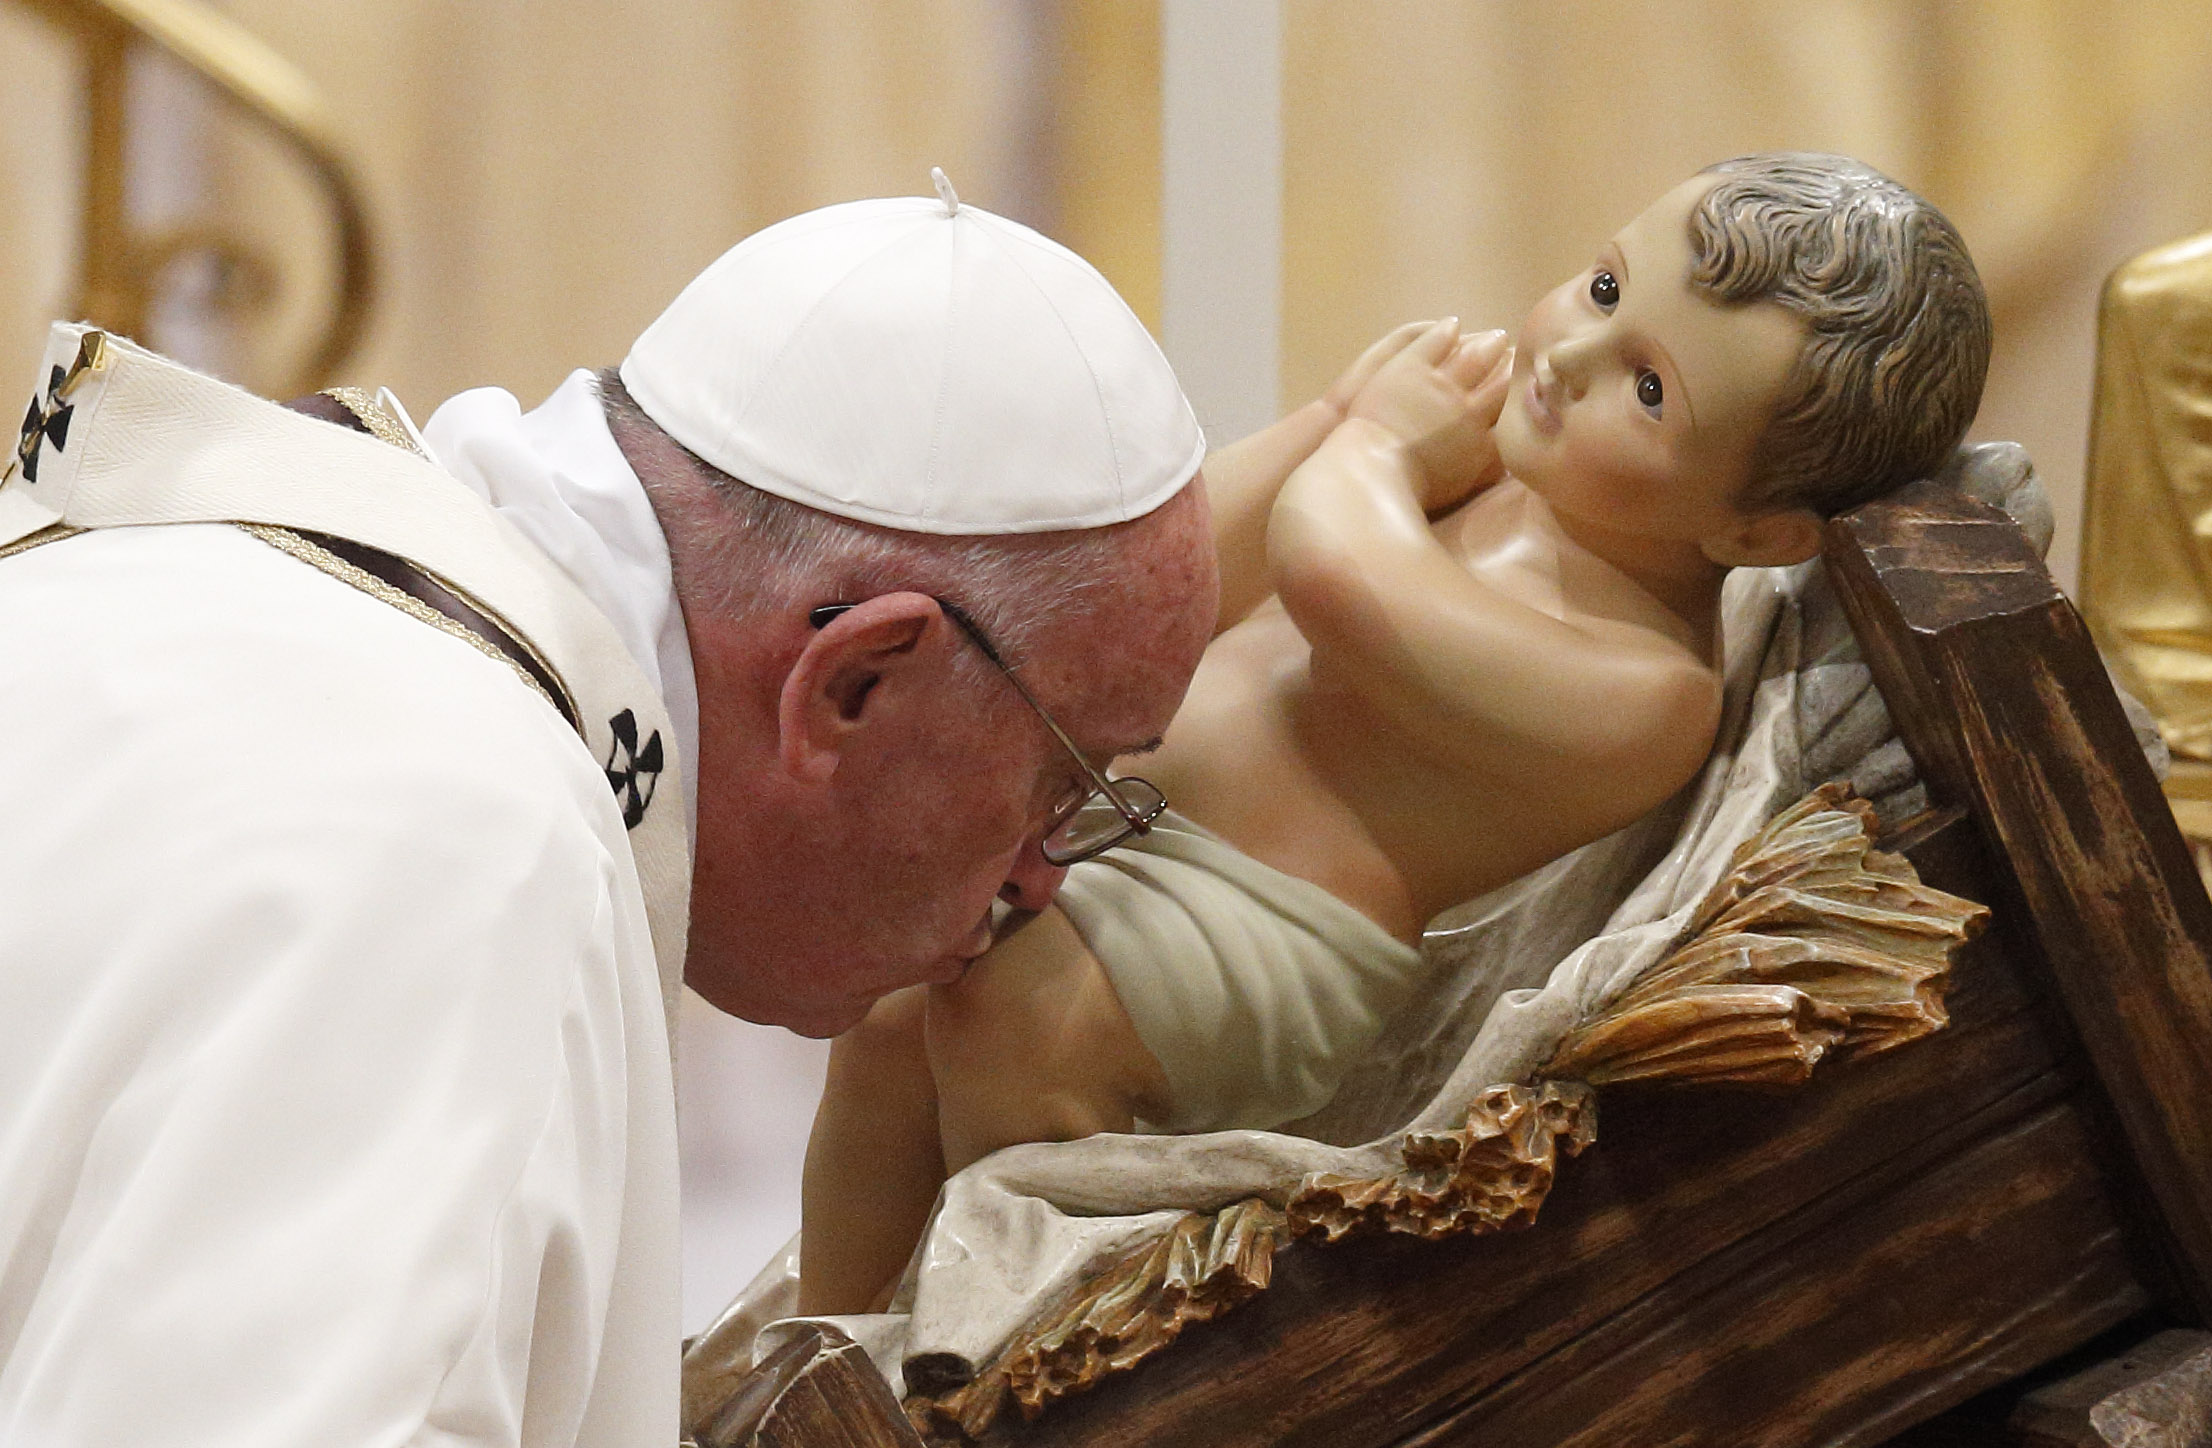 20151224T1244 006 CNS POPE CHRISTMAS 1 - 2015 Archives